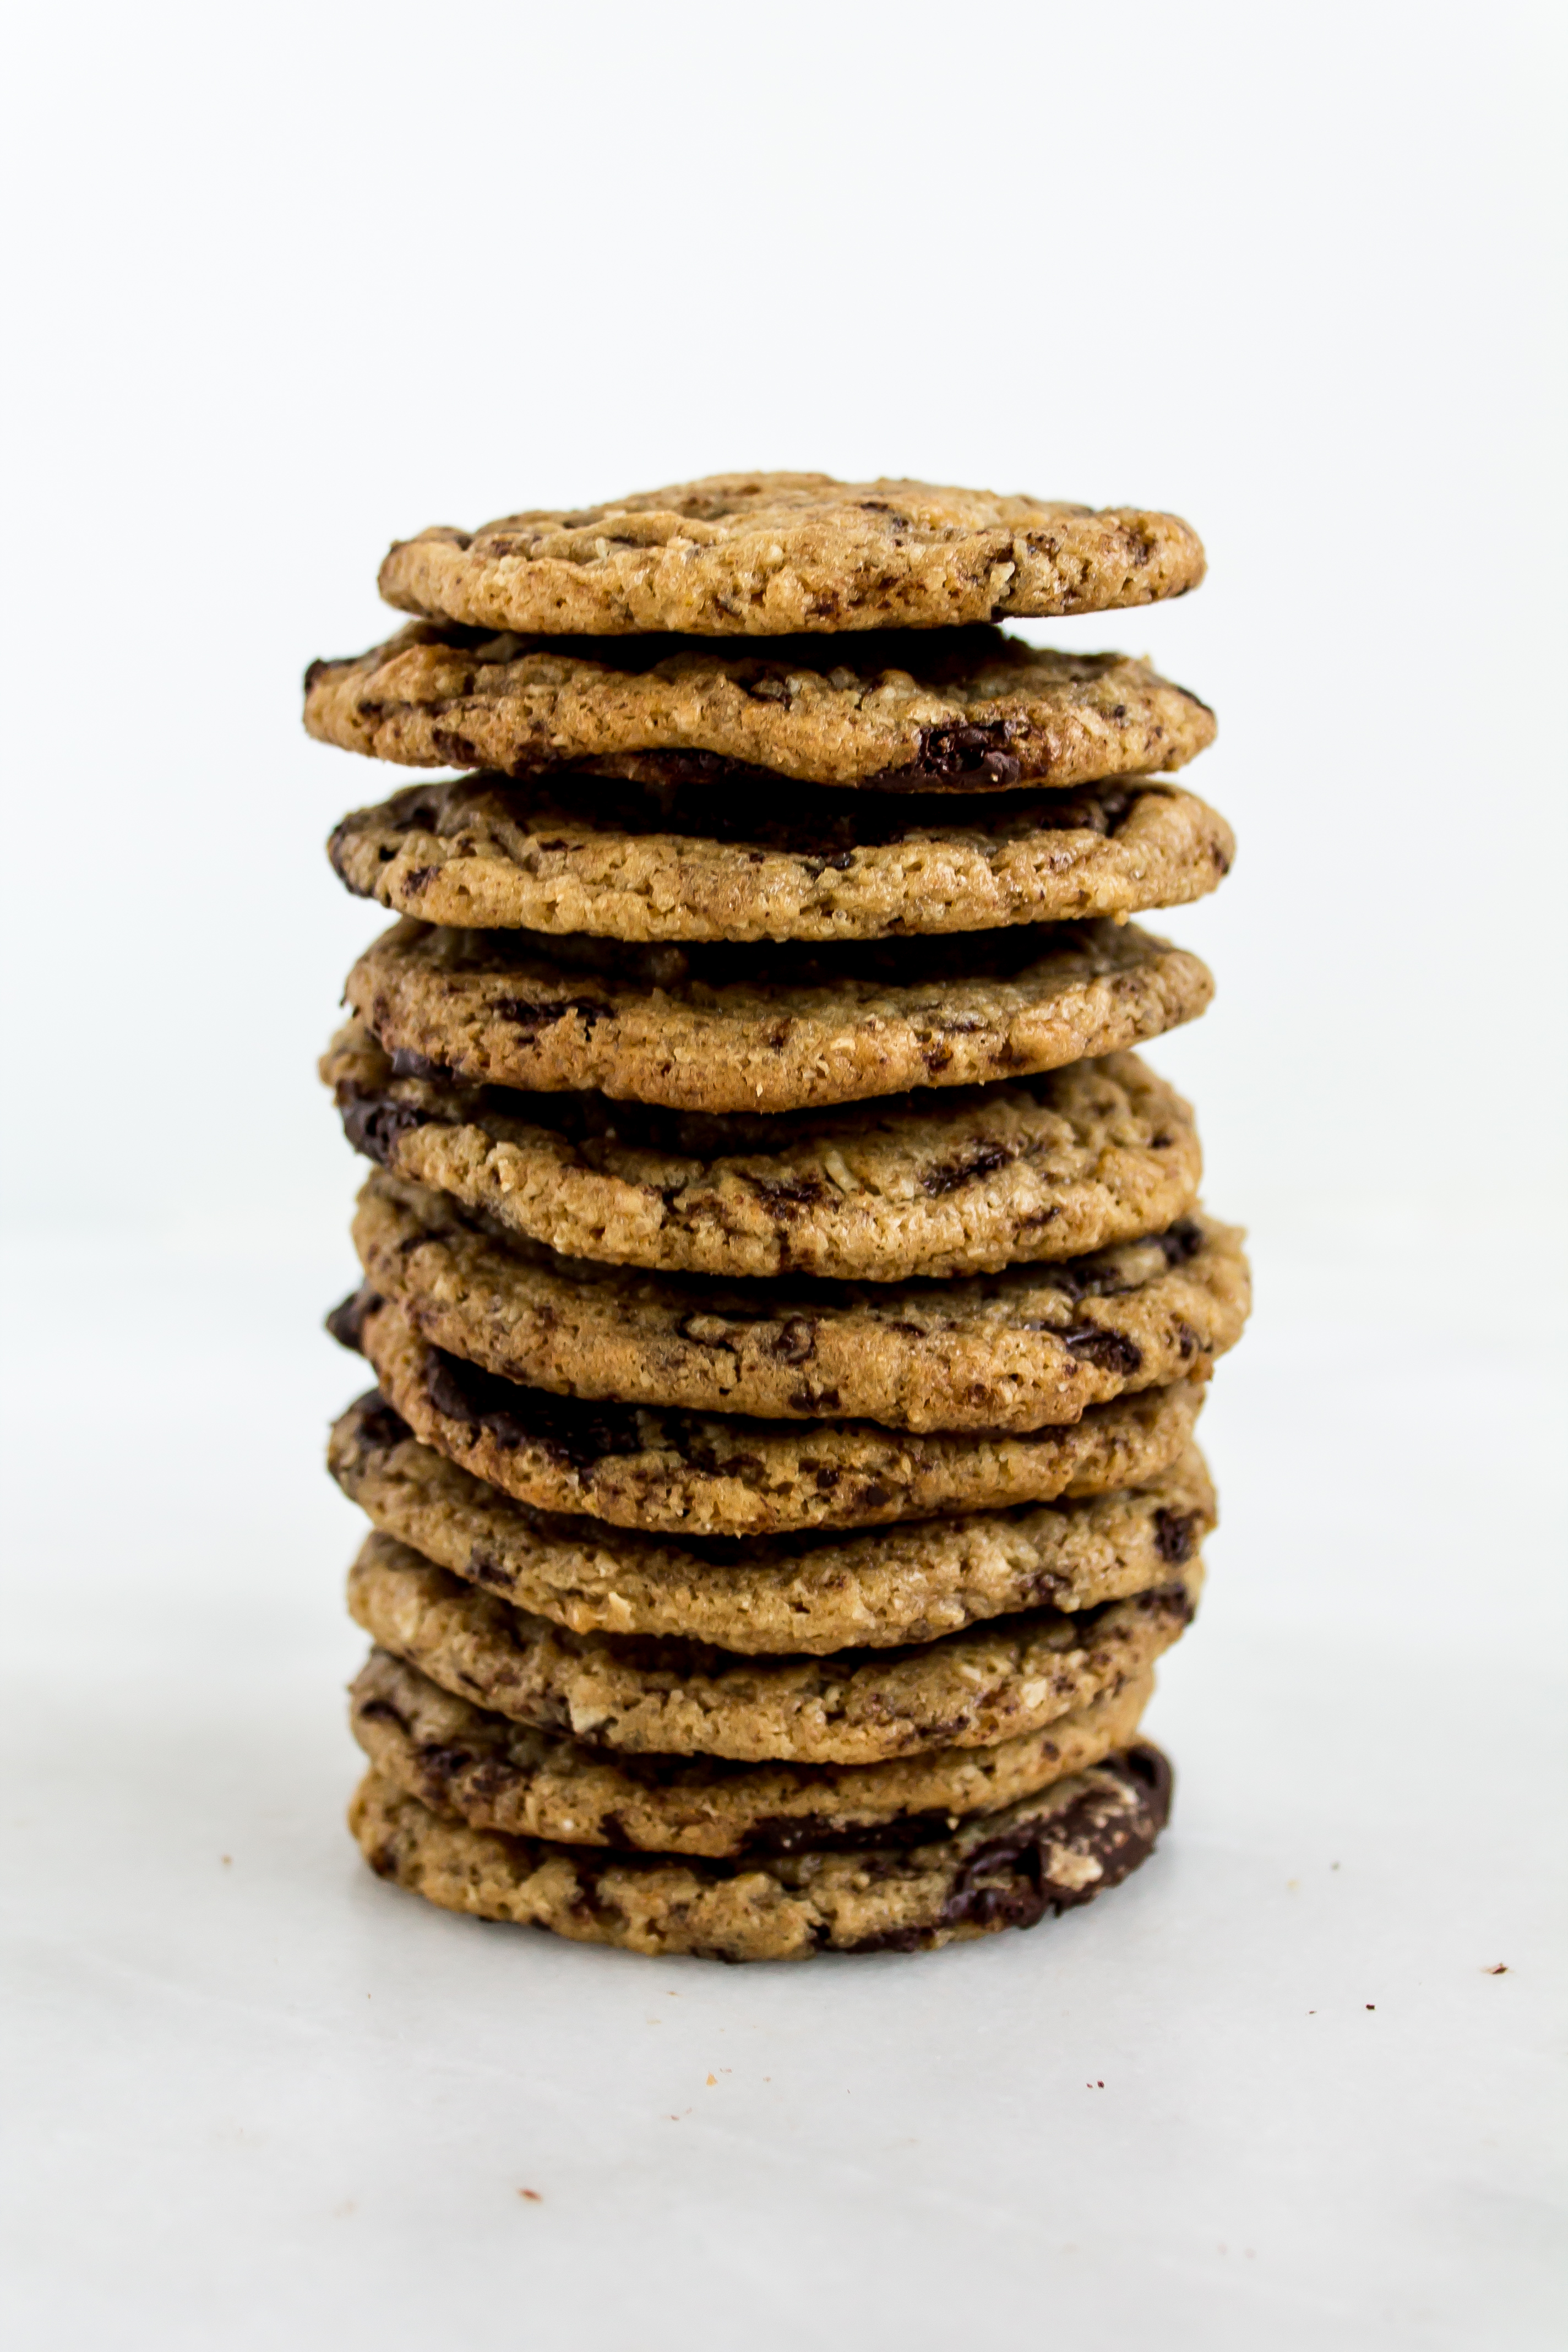 Spelt chocolate chip cookies are a unique twist on the classic chocolate chip cookie. With a nutty flavor, dark chocolate chunks, and that sweet and salty combination, they are a delicious treat. | www.passthecookies.com